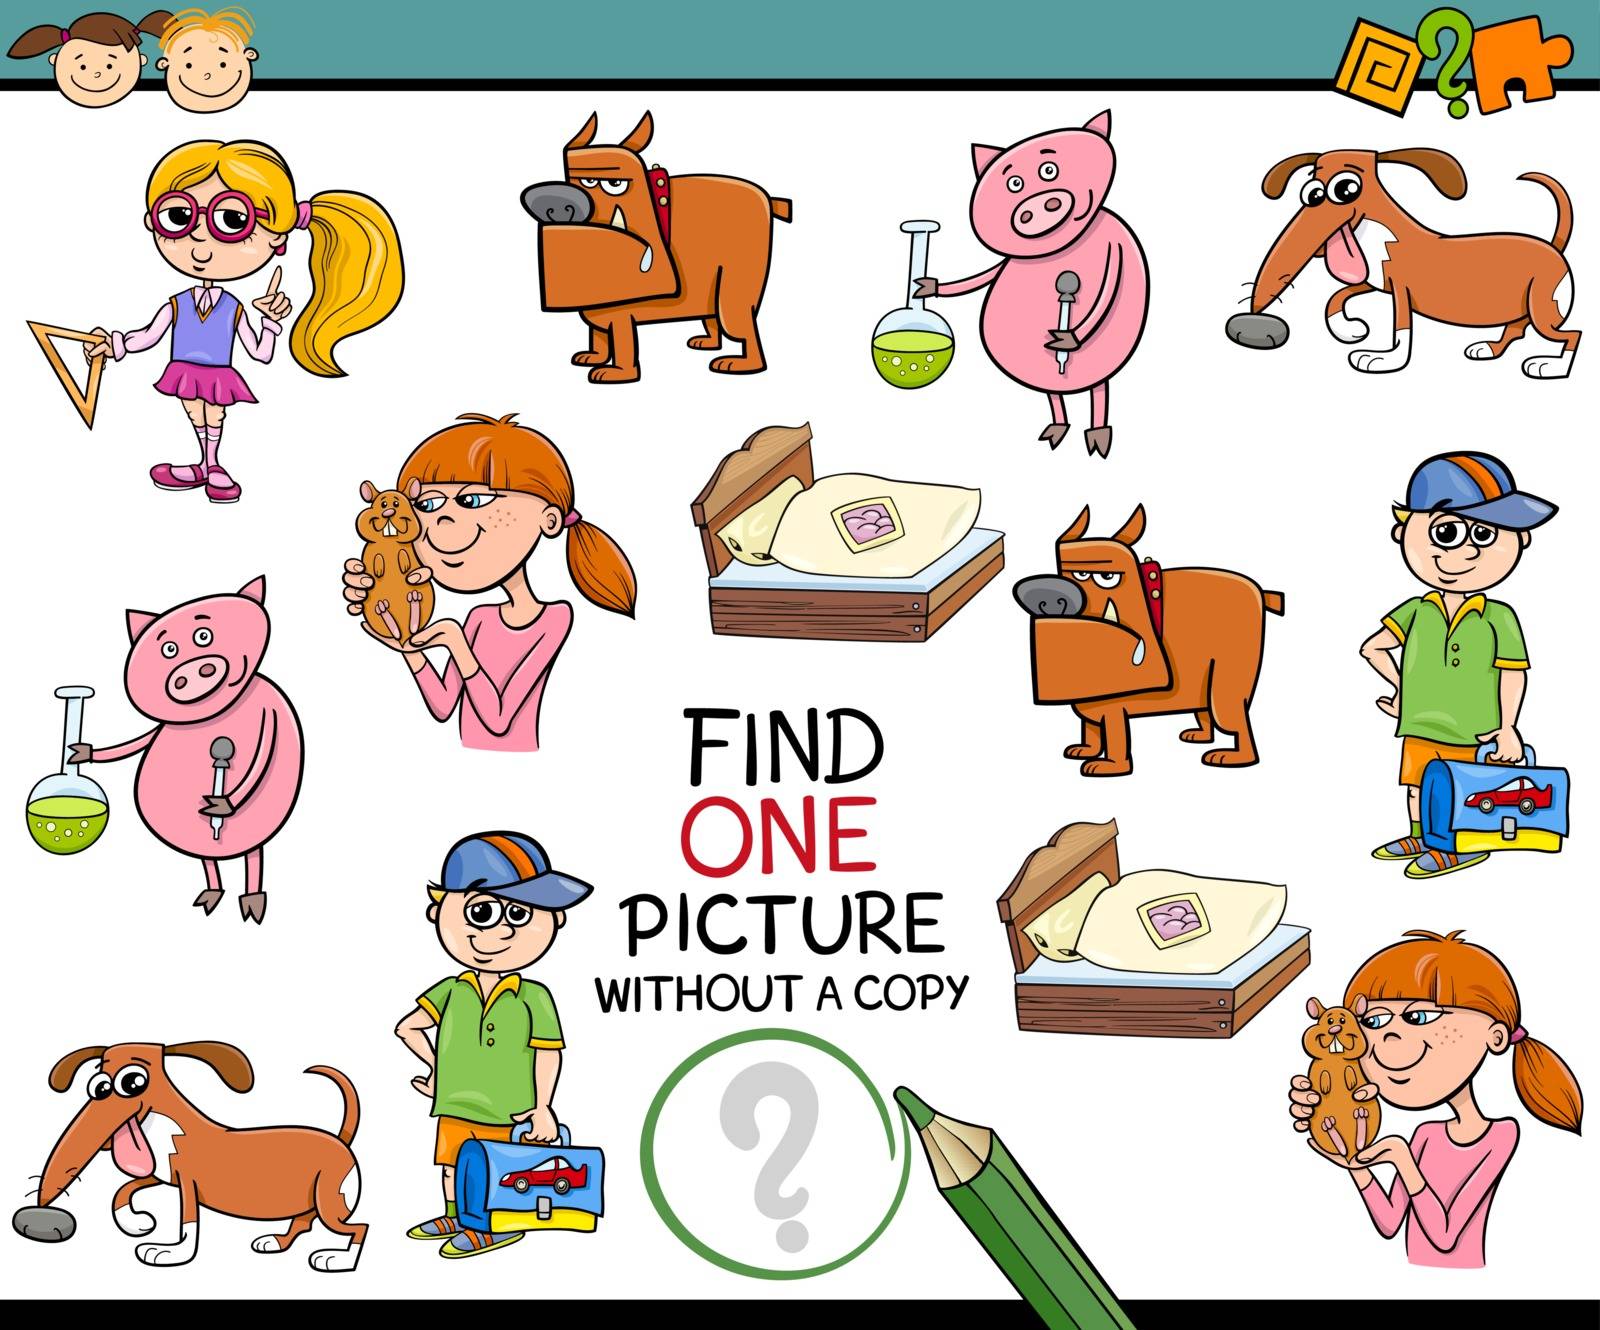 Cartoon Illustration of Educational Game of Single Picture Search for Preschool Children